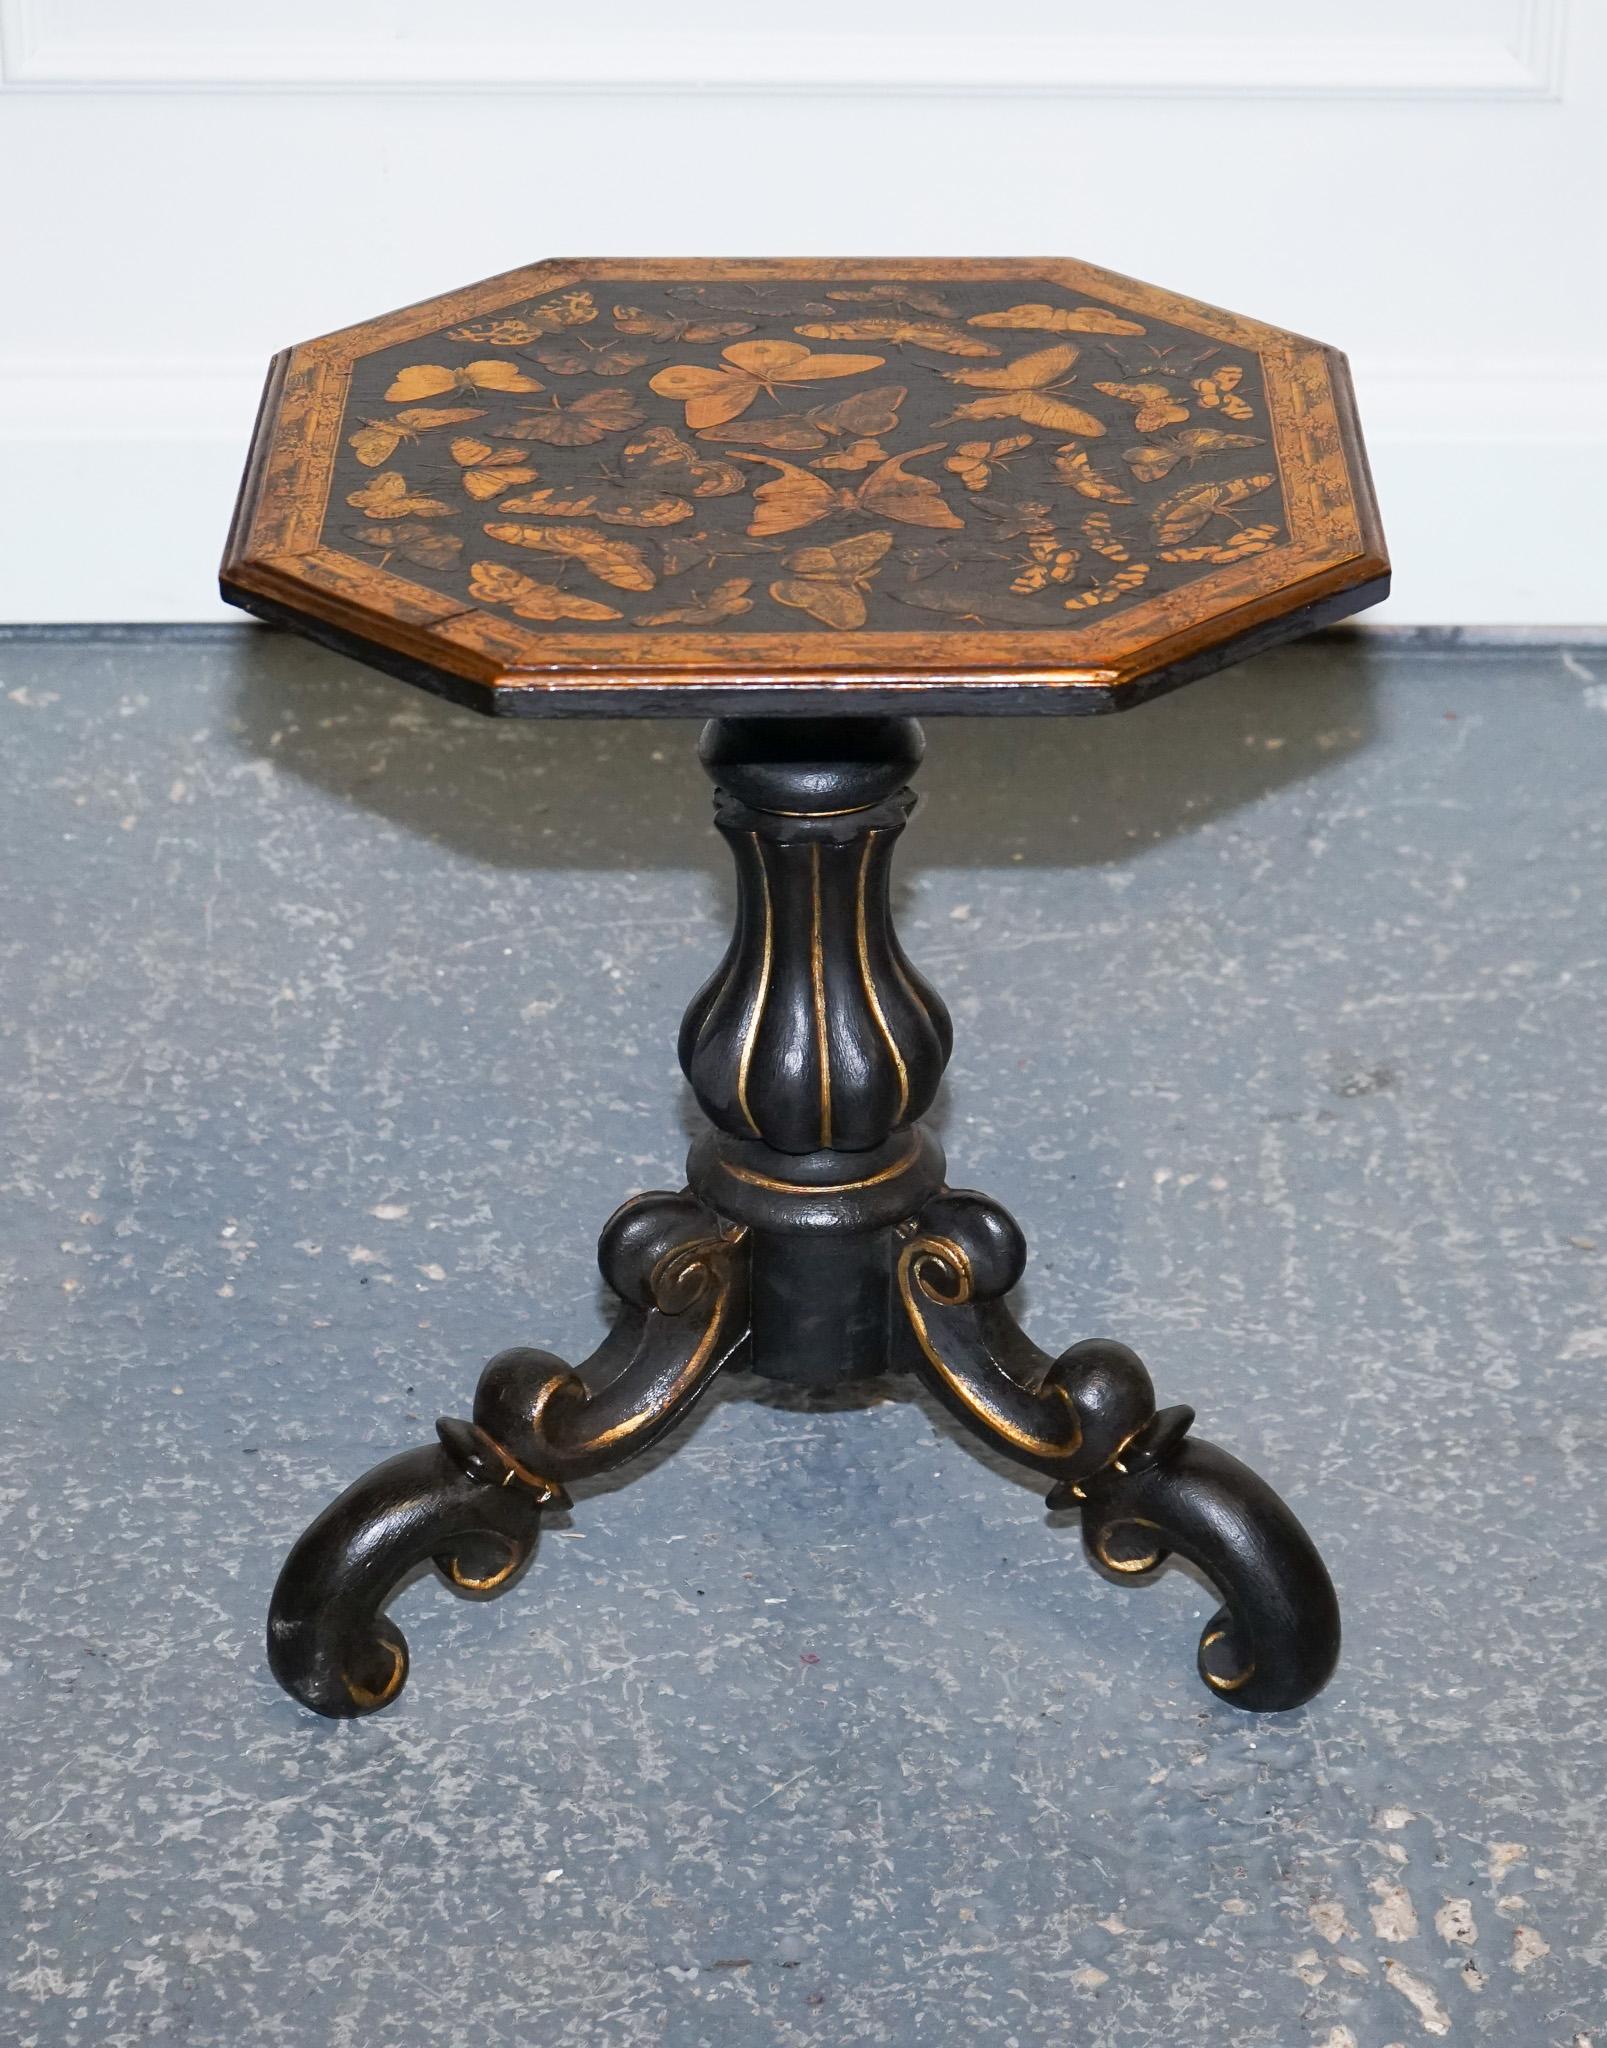 We are delighted to offer for sale this Lovely Victorian Decoupage Hand Painted Side Table.

This Victorian decoupage hand-painted side wine lamp table is a truly stunning piece of furniture, crafted with great care and attention to detail. The